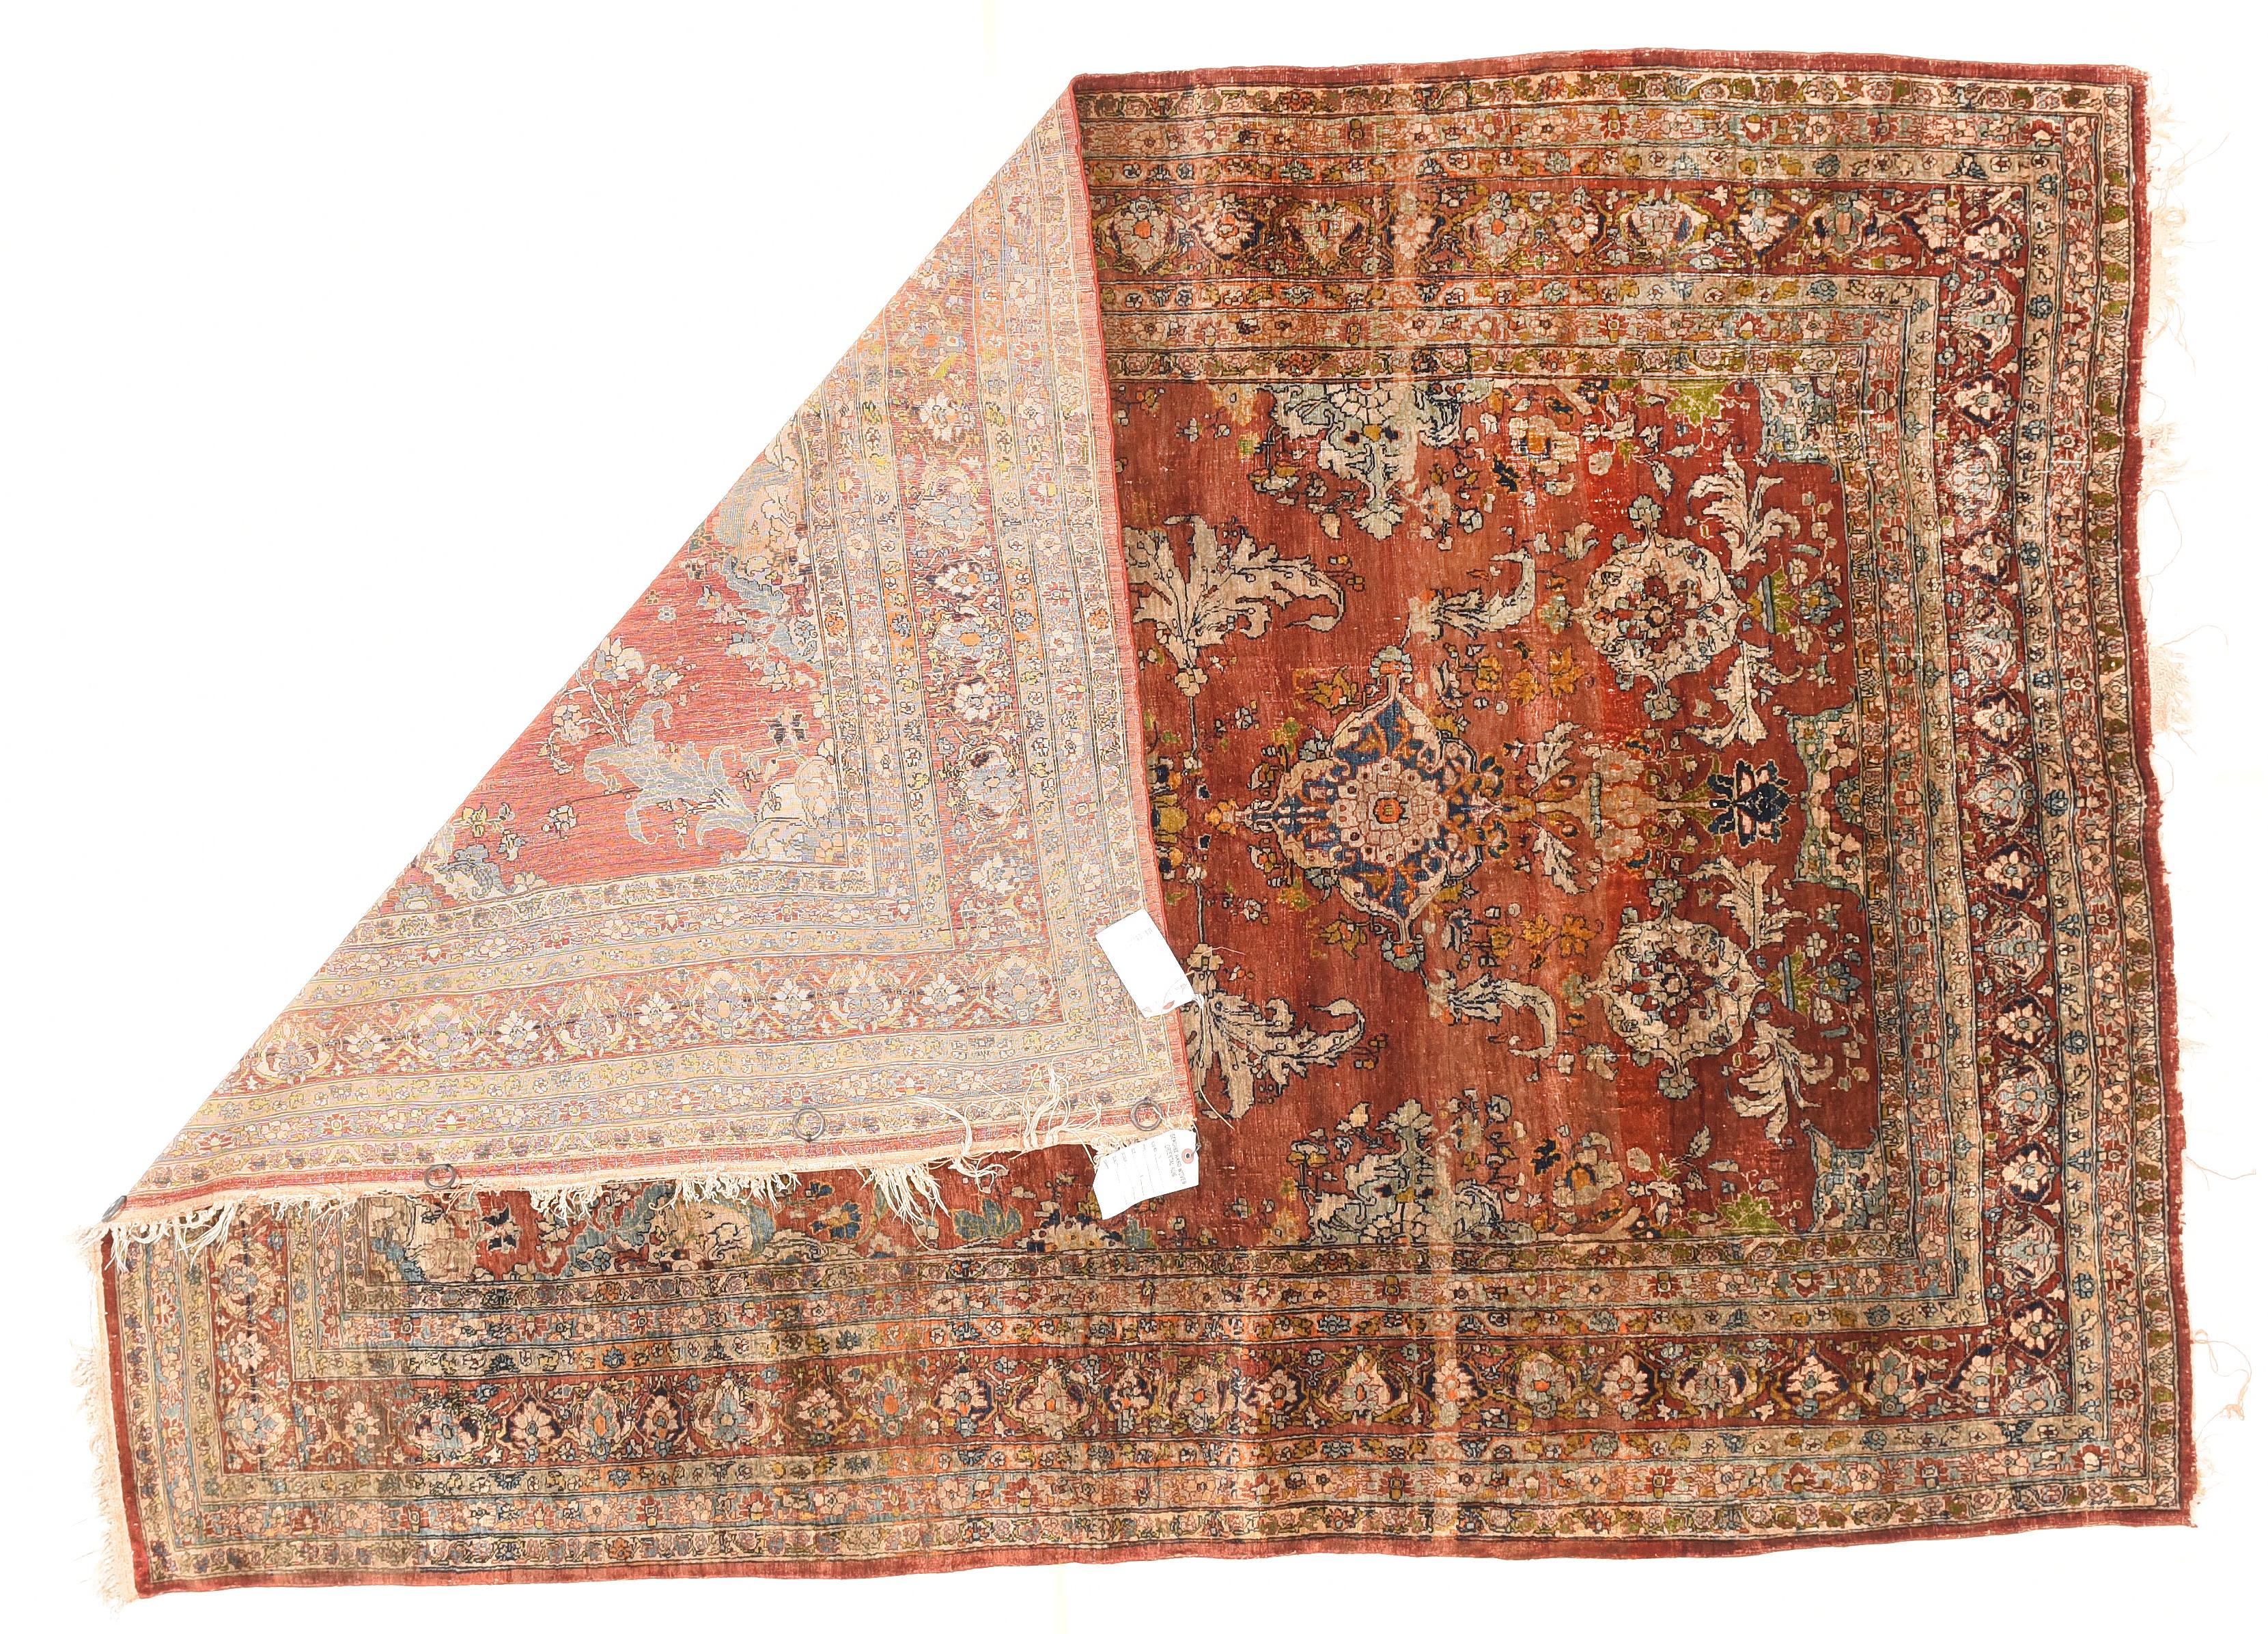 Extremly Fine Rare Persian Antique Silk on Silk Heriz , Circa 1880
This beautiful Heriz antique rug in excellent condition, rare silk on silk foundation one of kind

Heriz rugs are of coarse construction. The rugs range from 30 kpsi on the low end